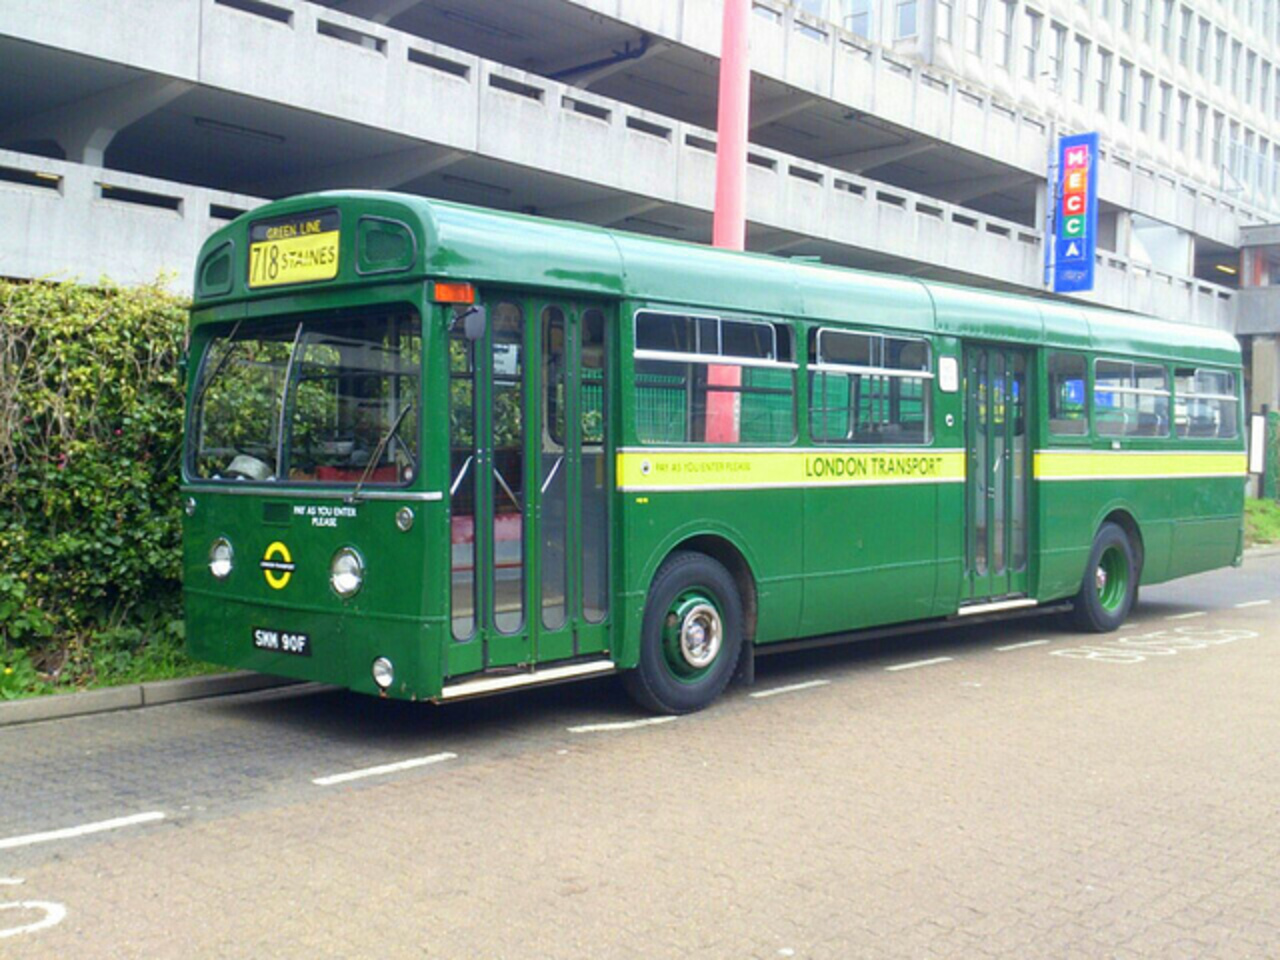 country area MB AEC Merlin | Flickr - Photo Sharing!